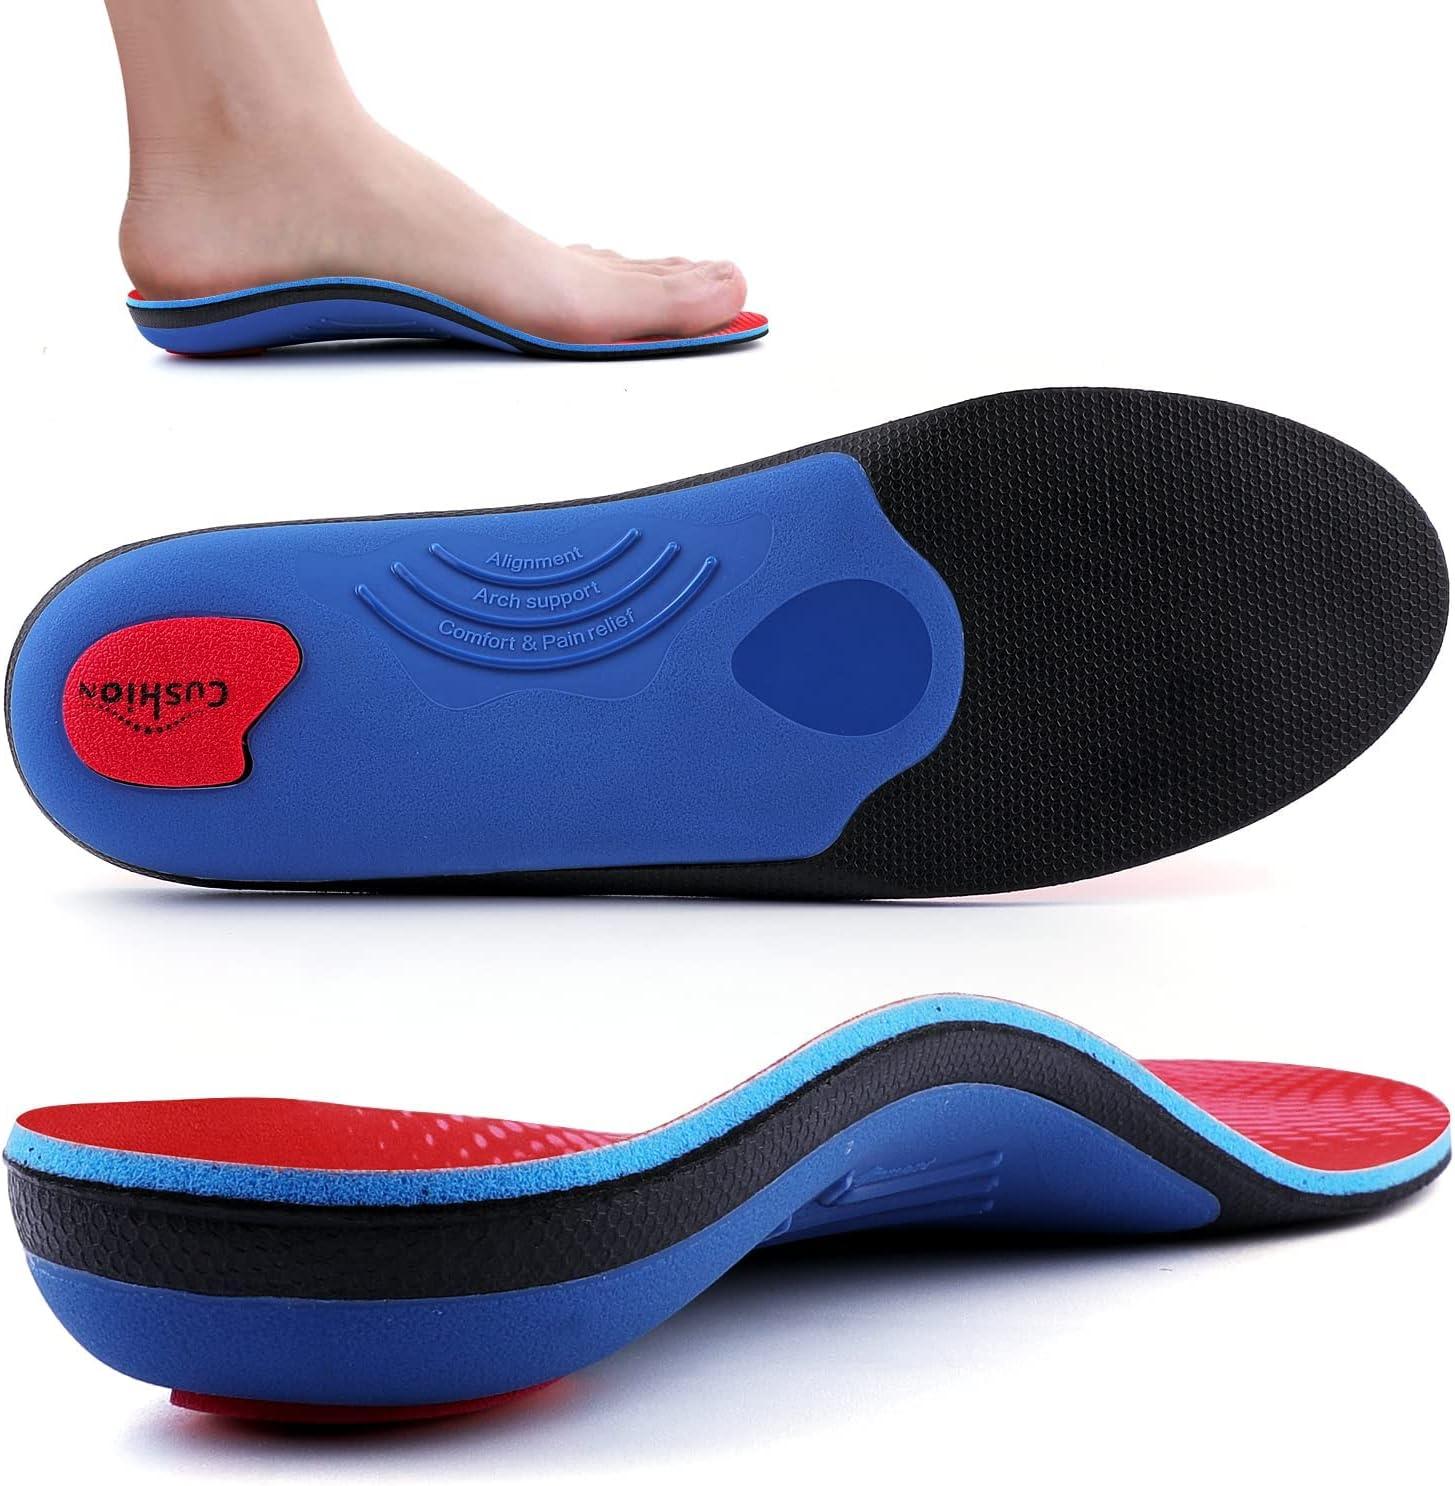 Walkomfy Heavy Duty Support Orthotics Vans Replacement Insoles